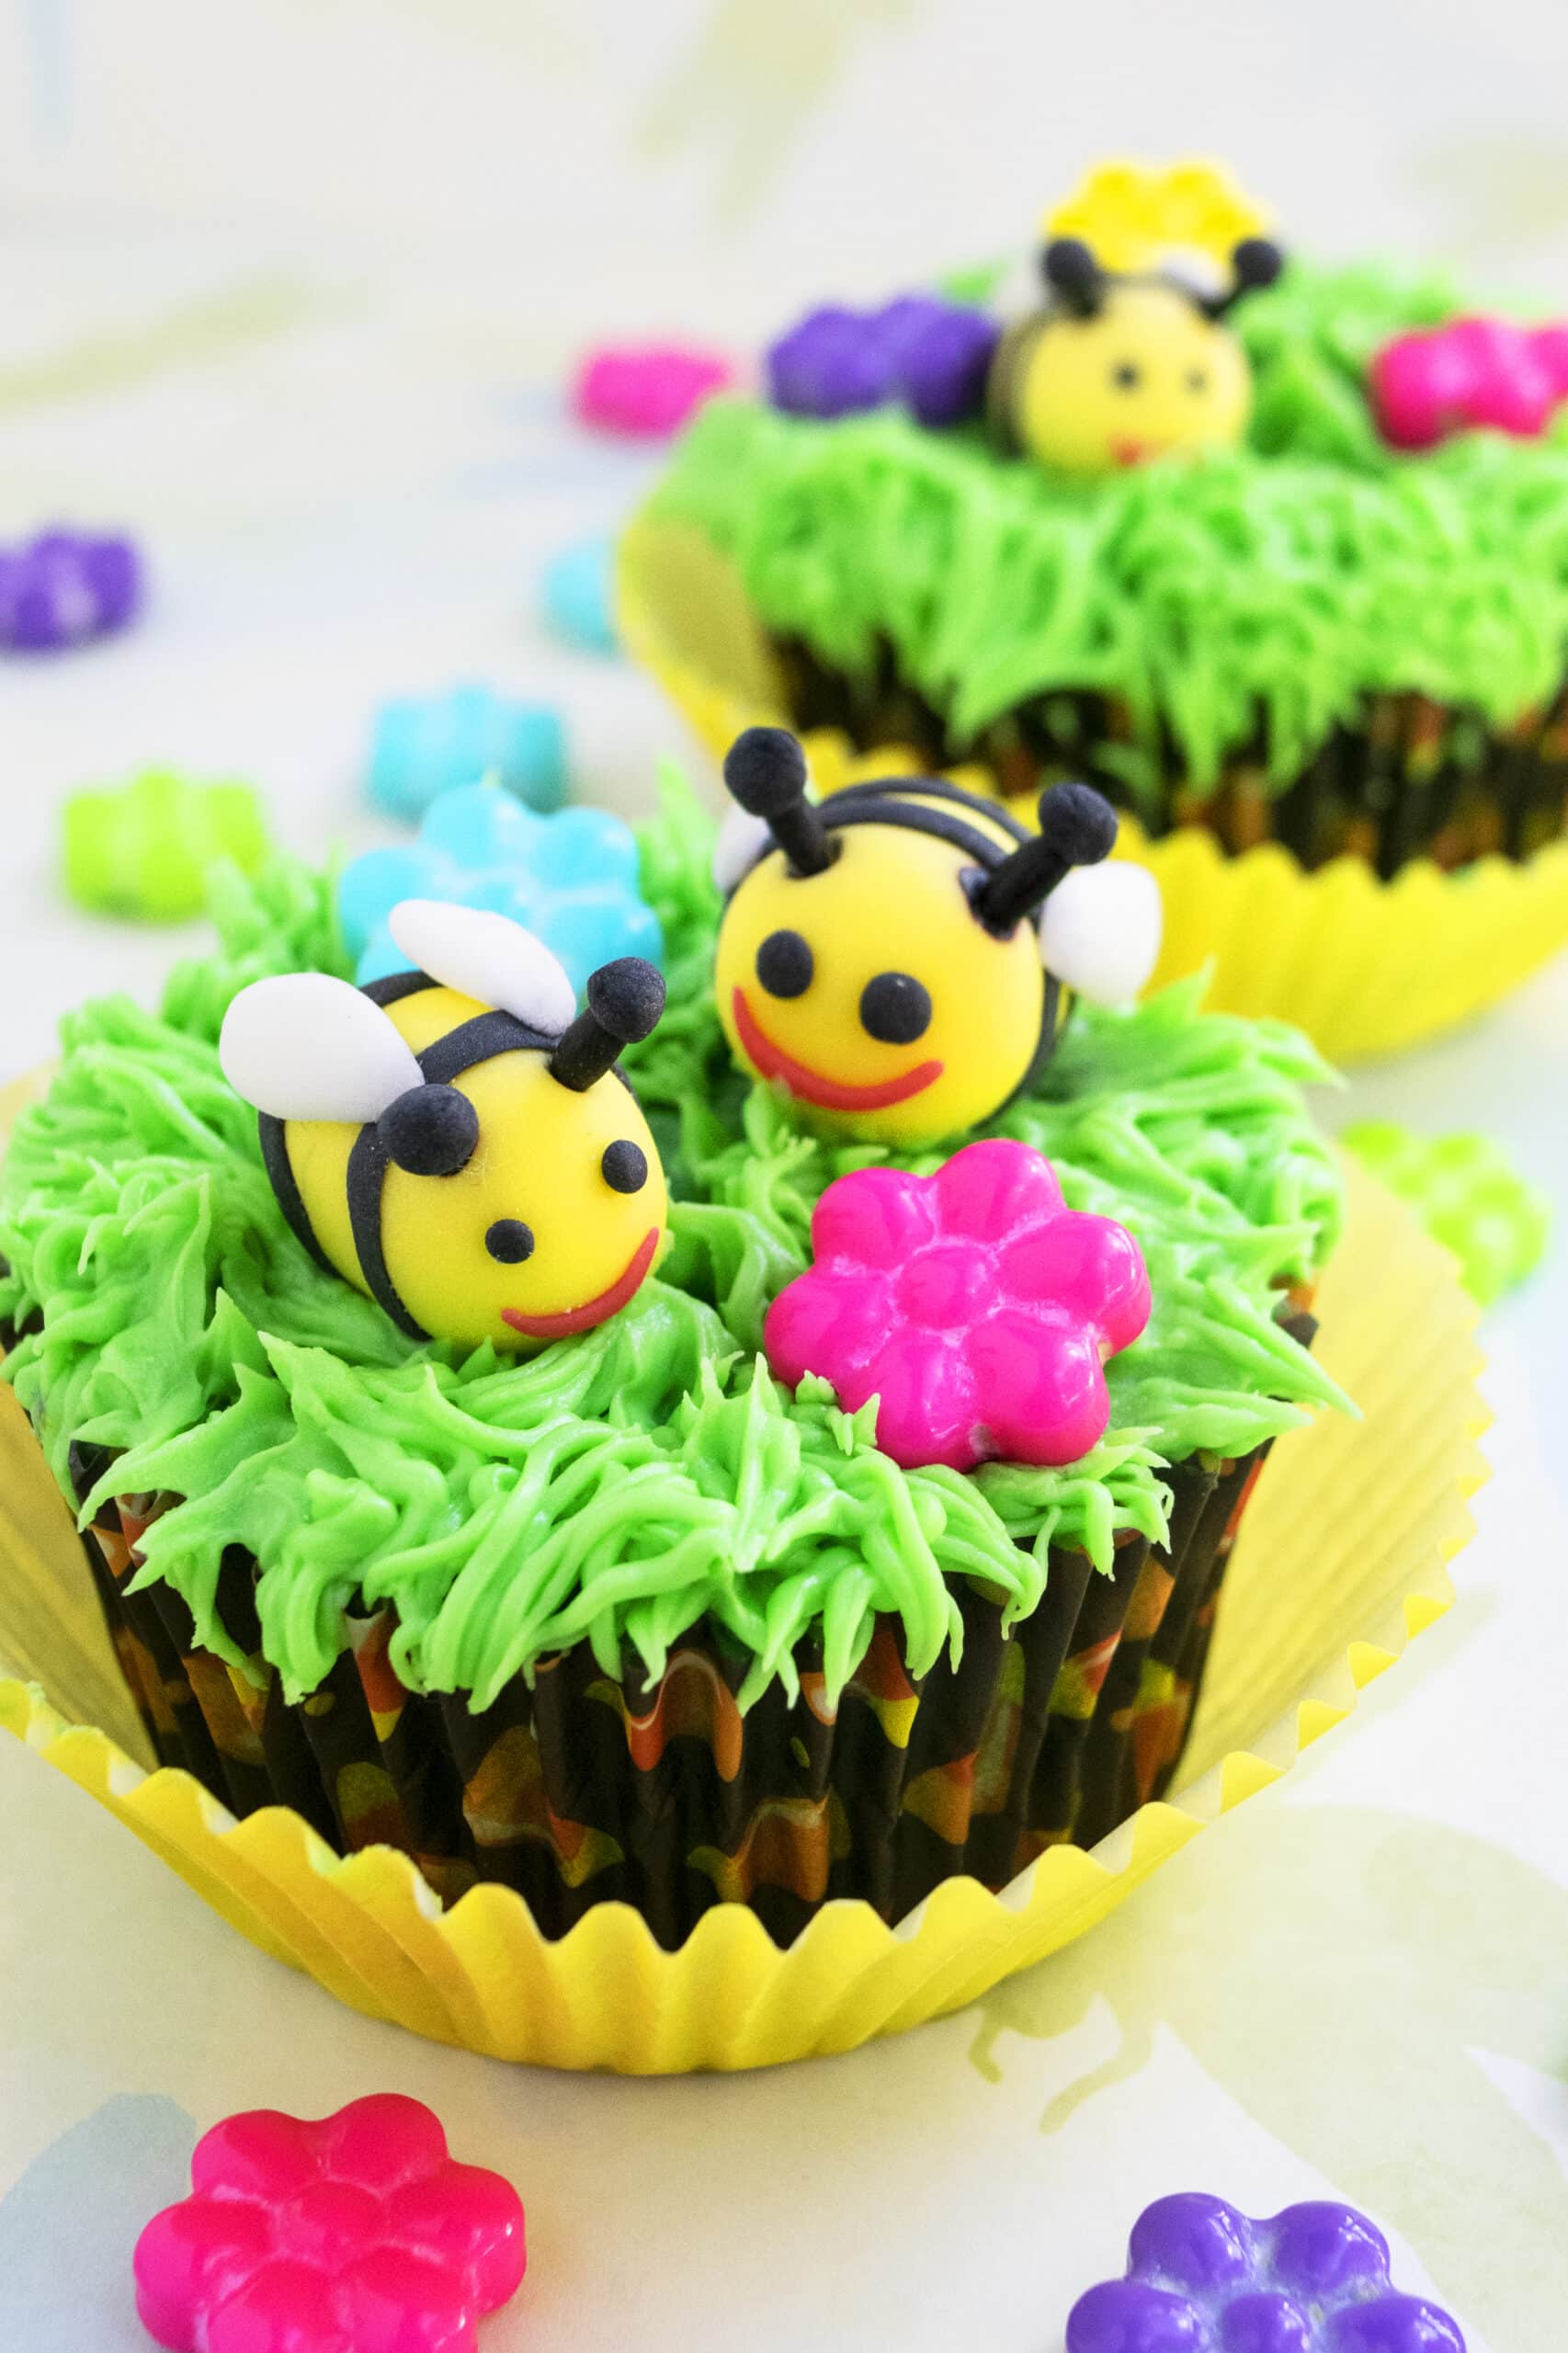 How to decorate cupcakes using icing, buttercream, fondant or